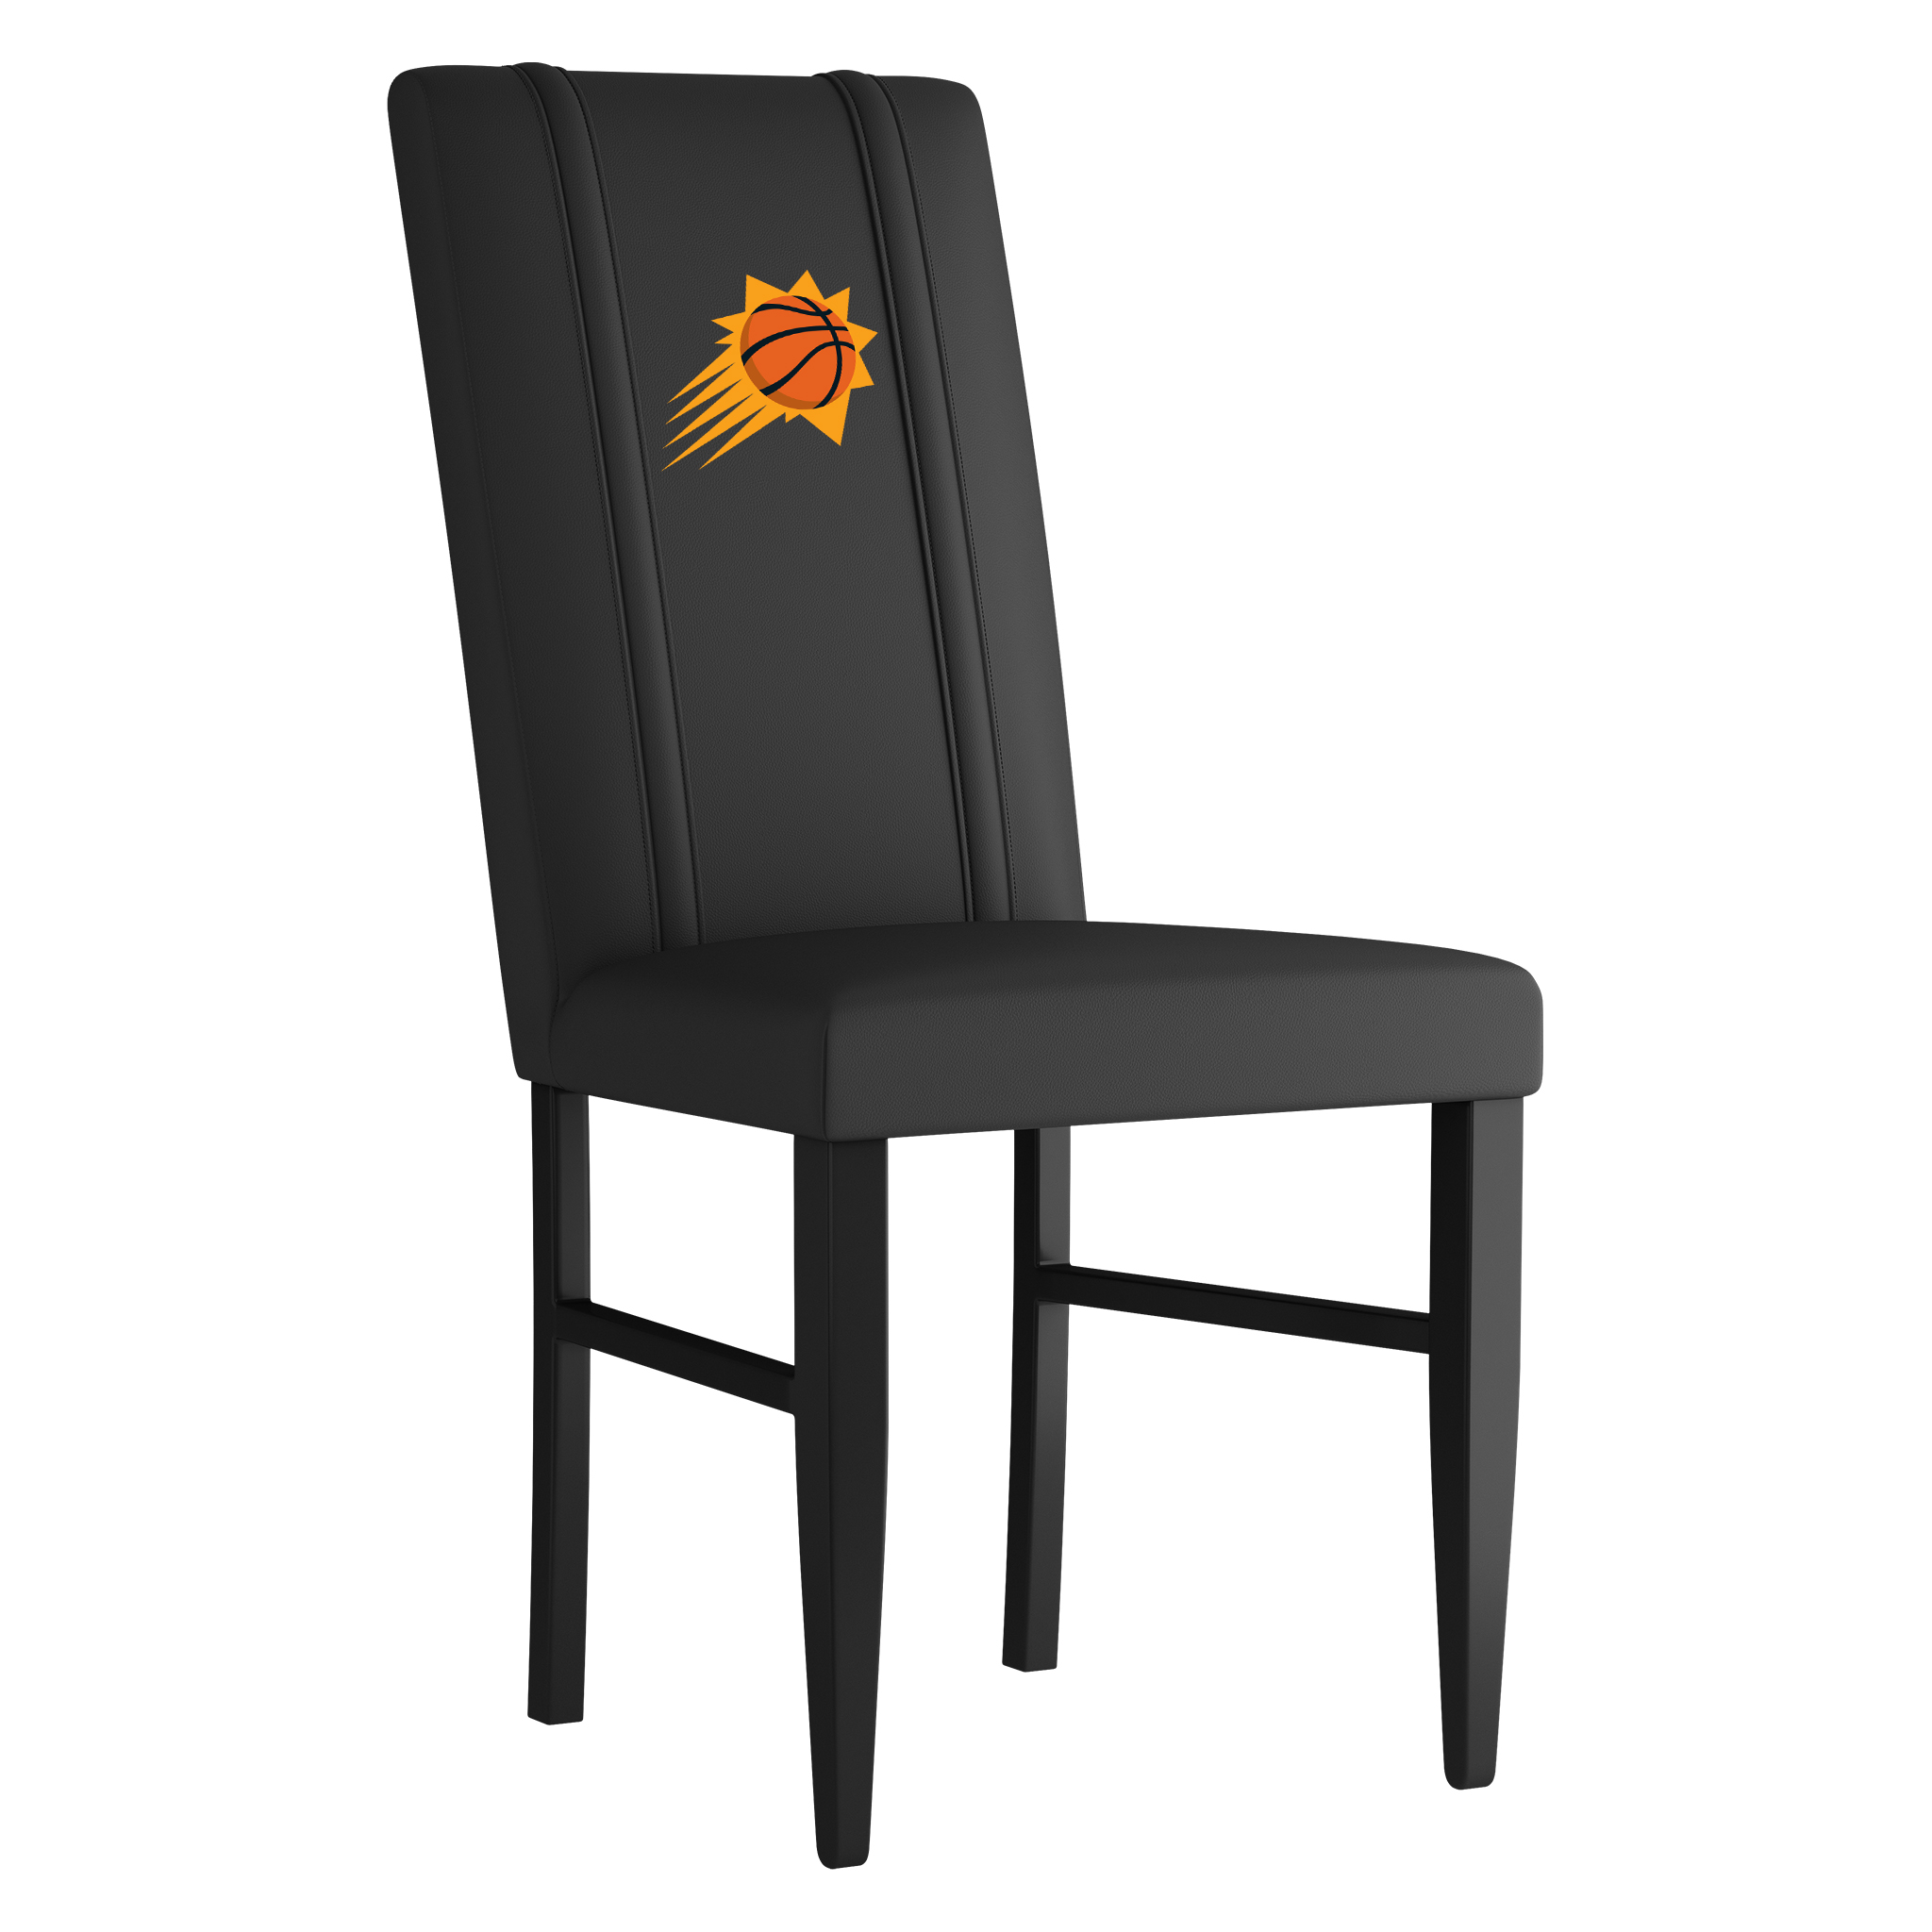 Phoenix Suns Side Chair 2000 With Phoenix Suns Primary